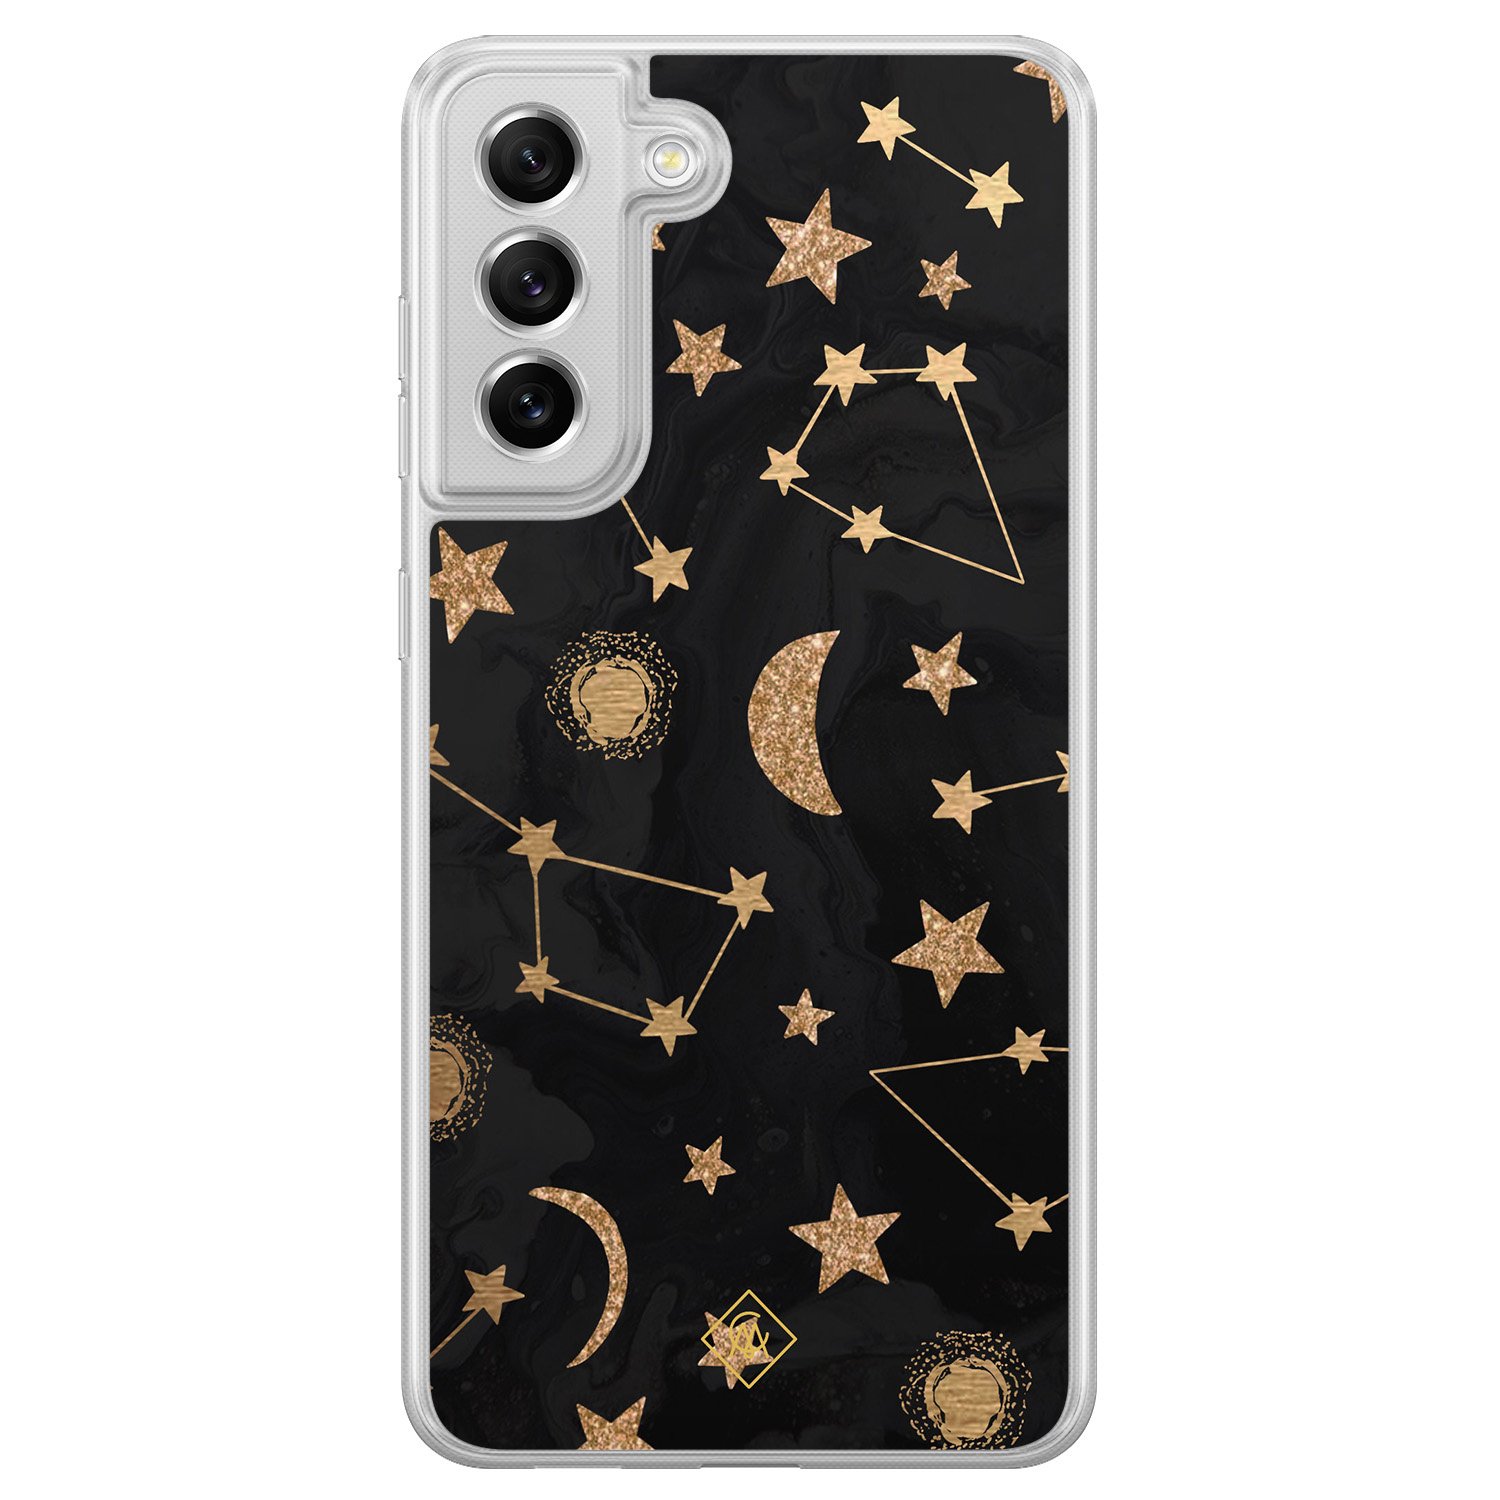 Samsung Galaxy S21 FE hybride hoesje - Counting the stars